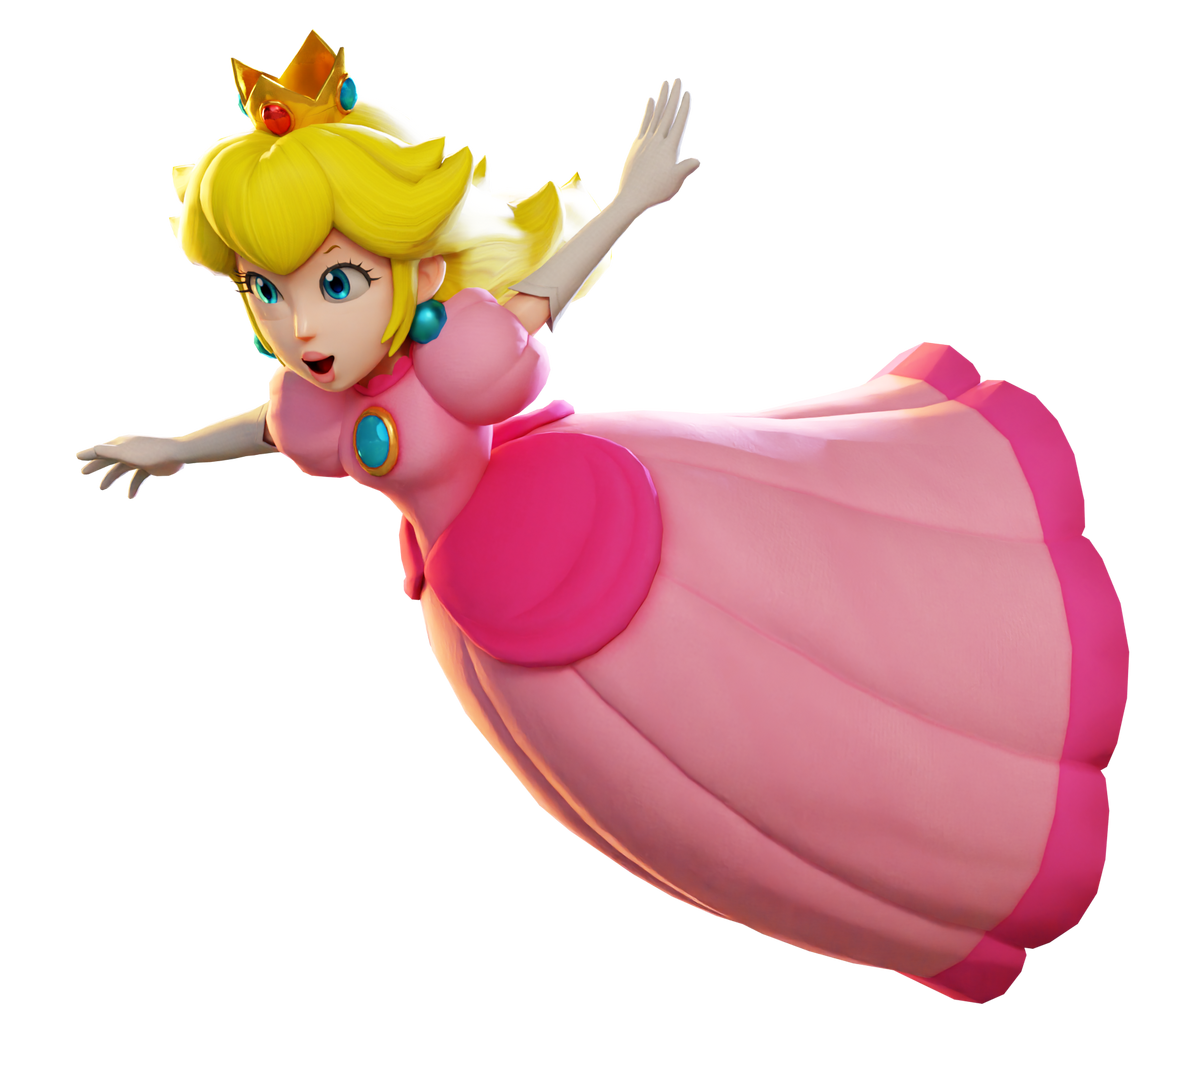 Who is Princess Peach? Age, Height, Backstory, Parents, and More